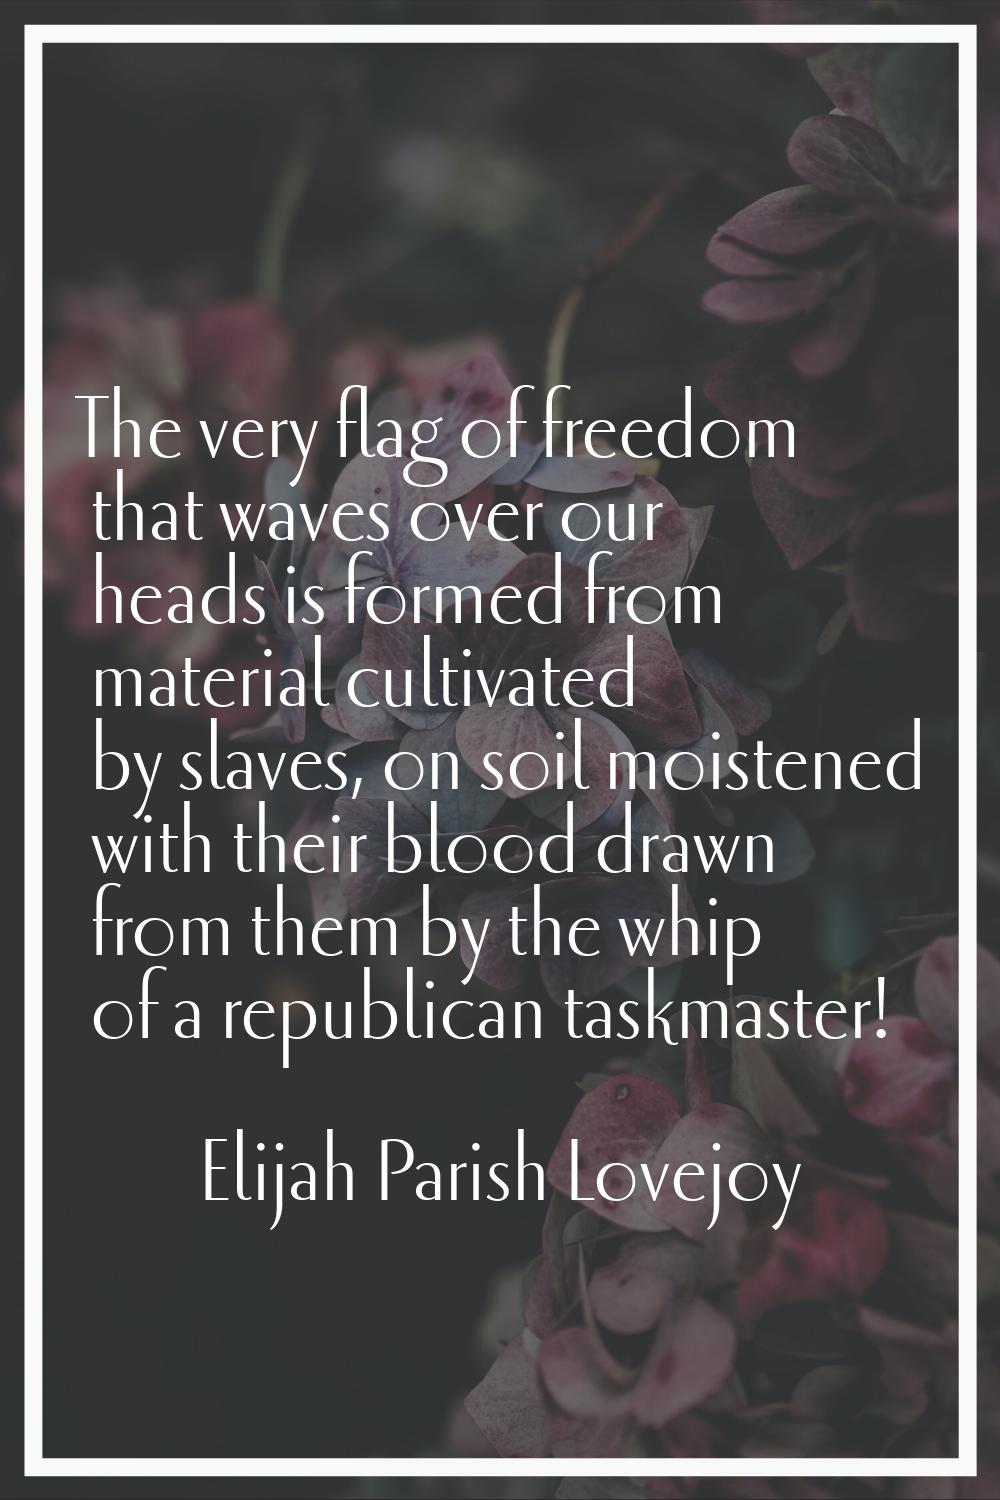 The very flag of freedom that waves over our heads is formed from material cultivated by slaves, on